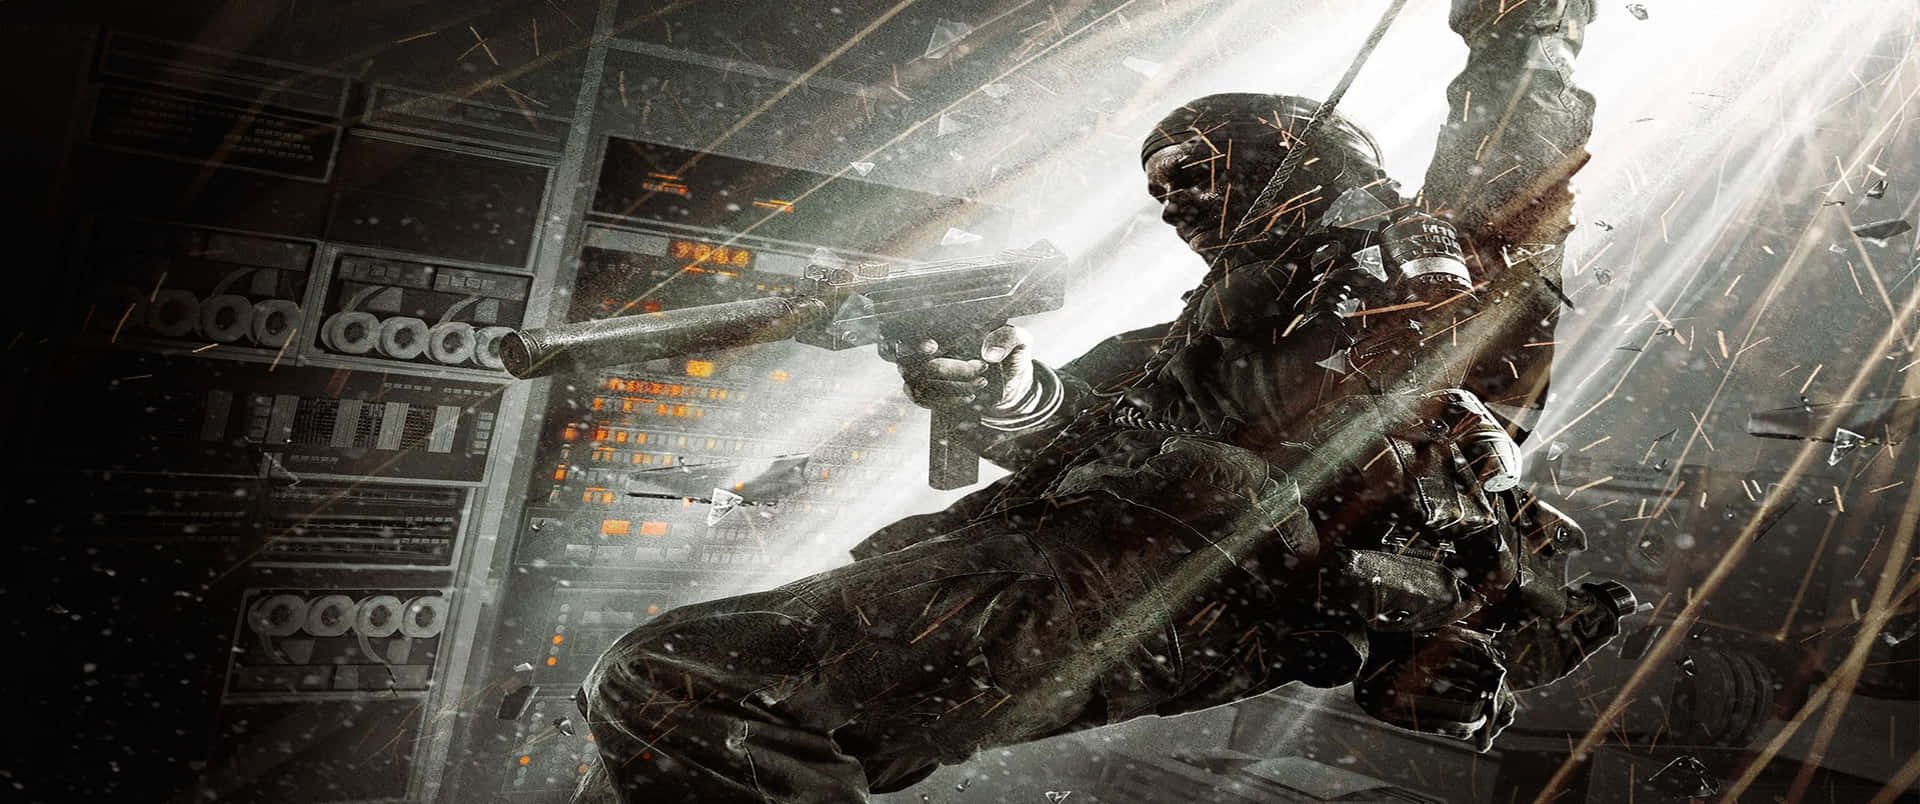 Epic 3440x1440p High Definition Wallpaper featuring Call of Duty Black Ops Cold War Gameplay